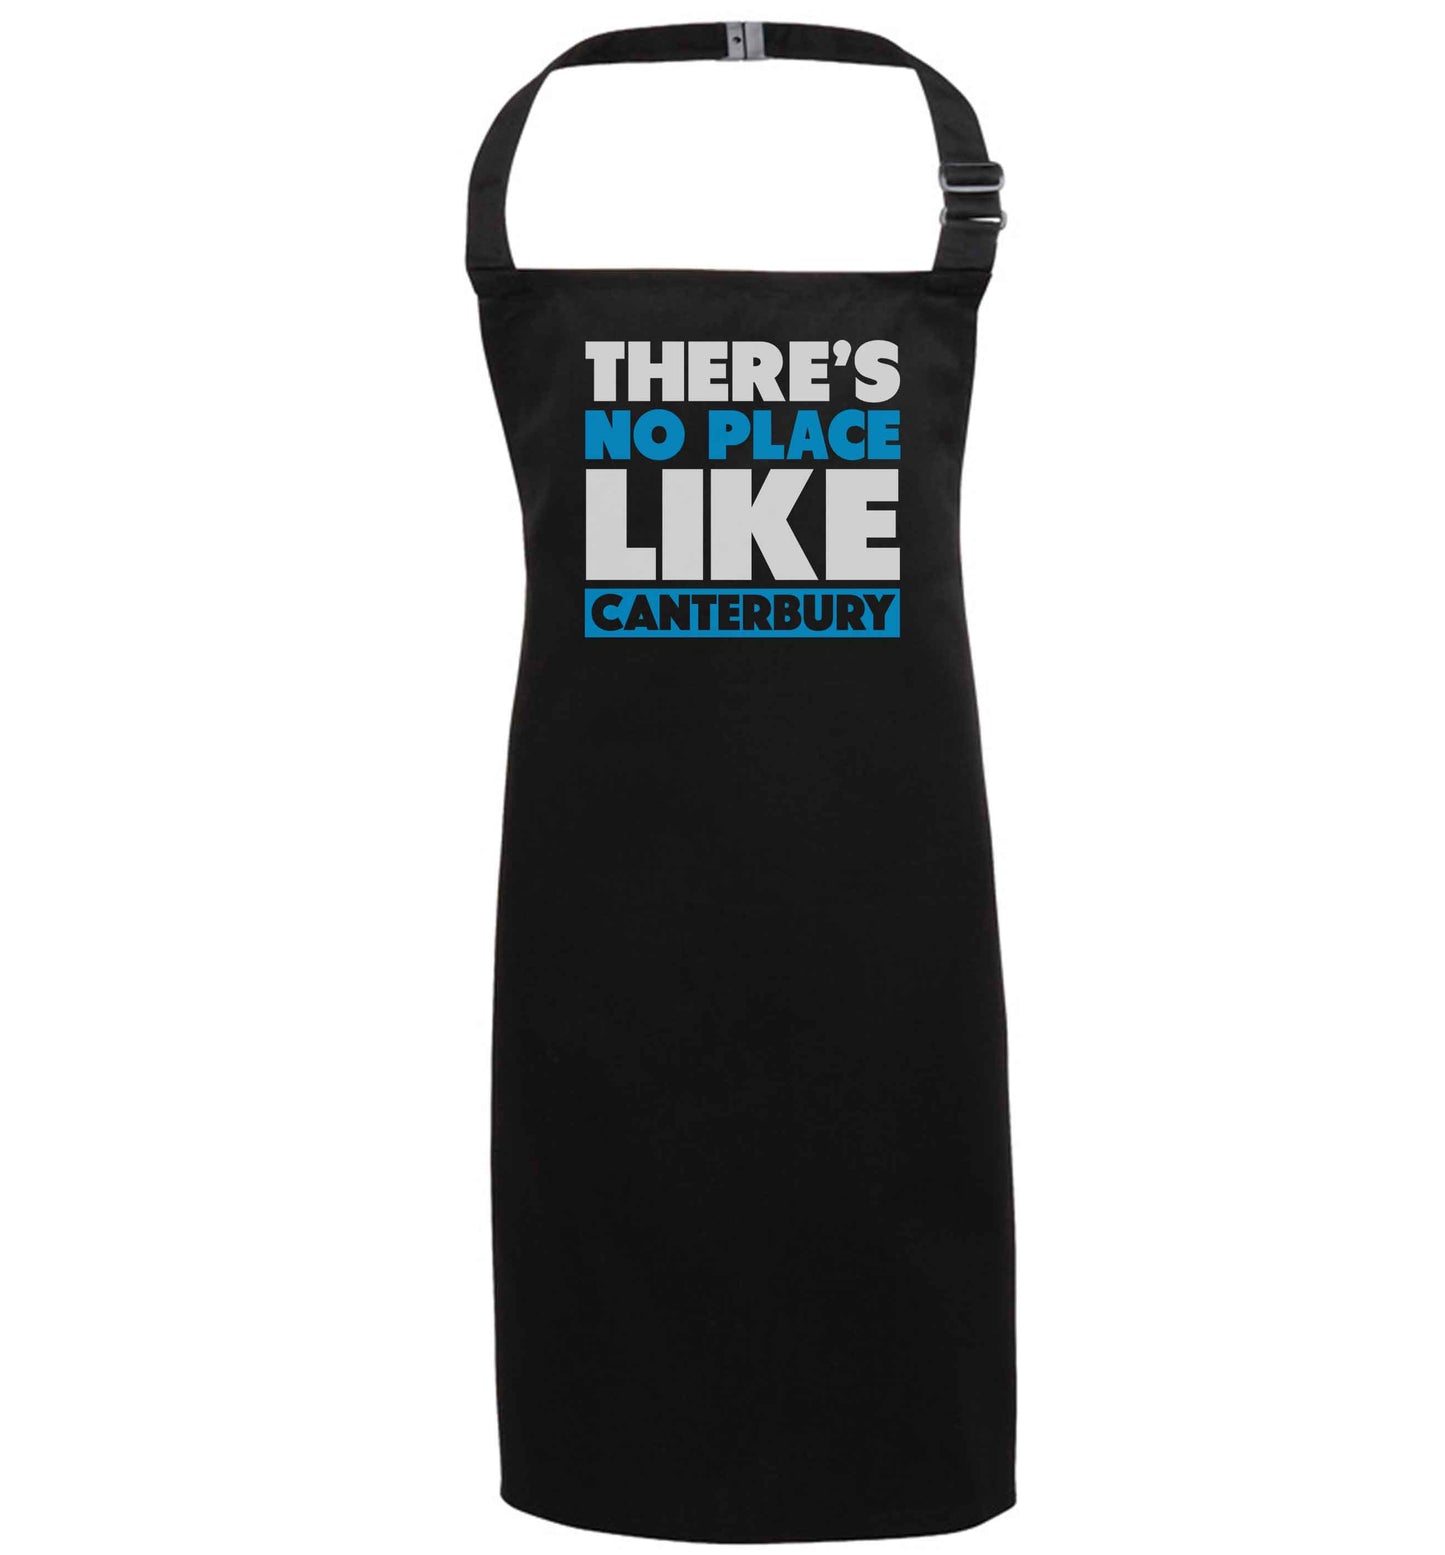 There's no place like Canterbury black apron 7-10 years